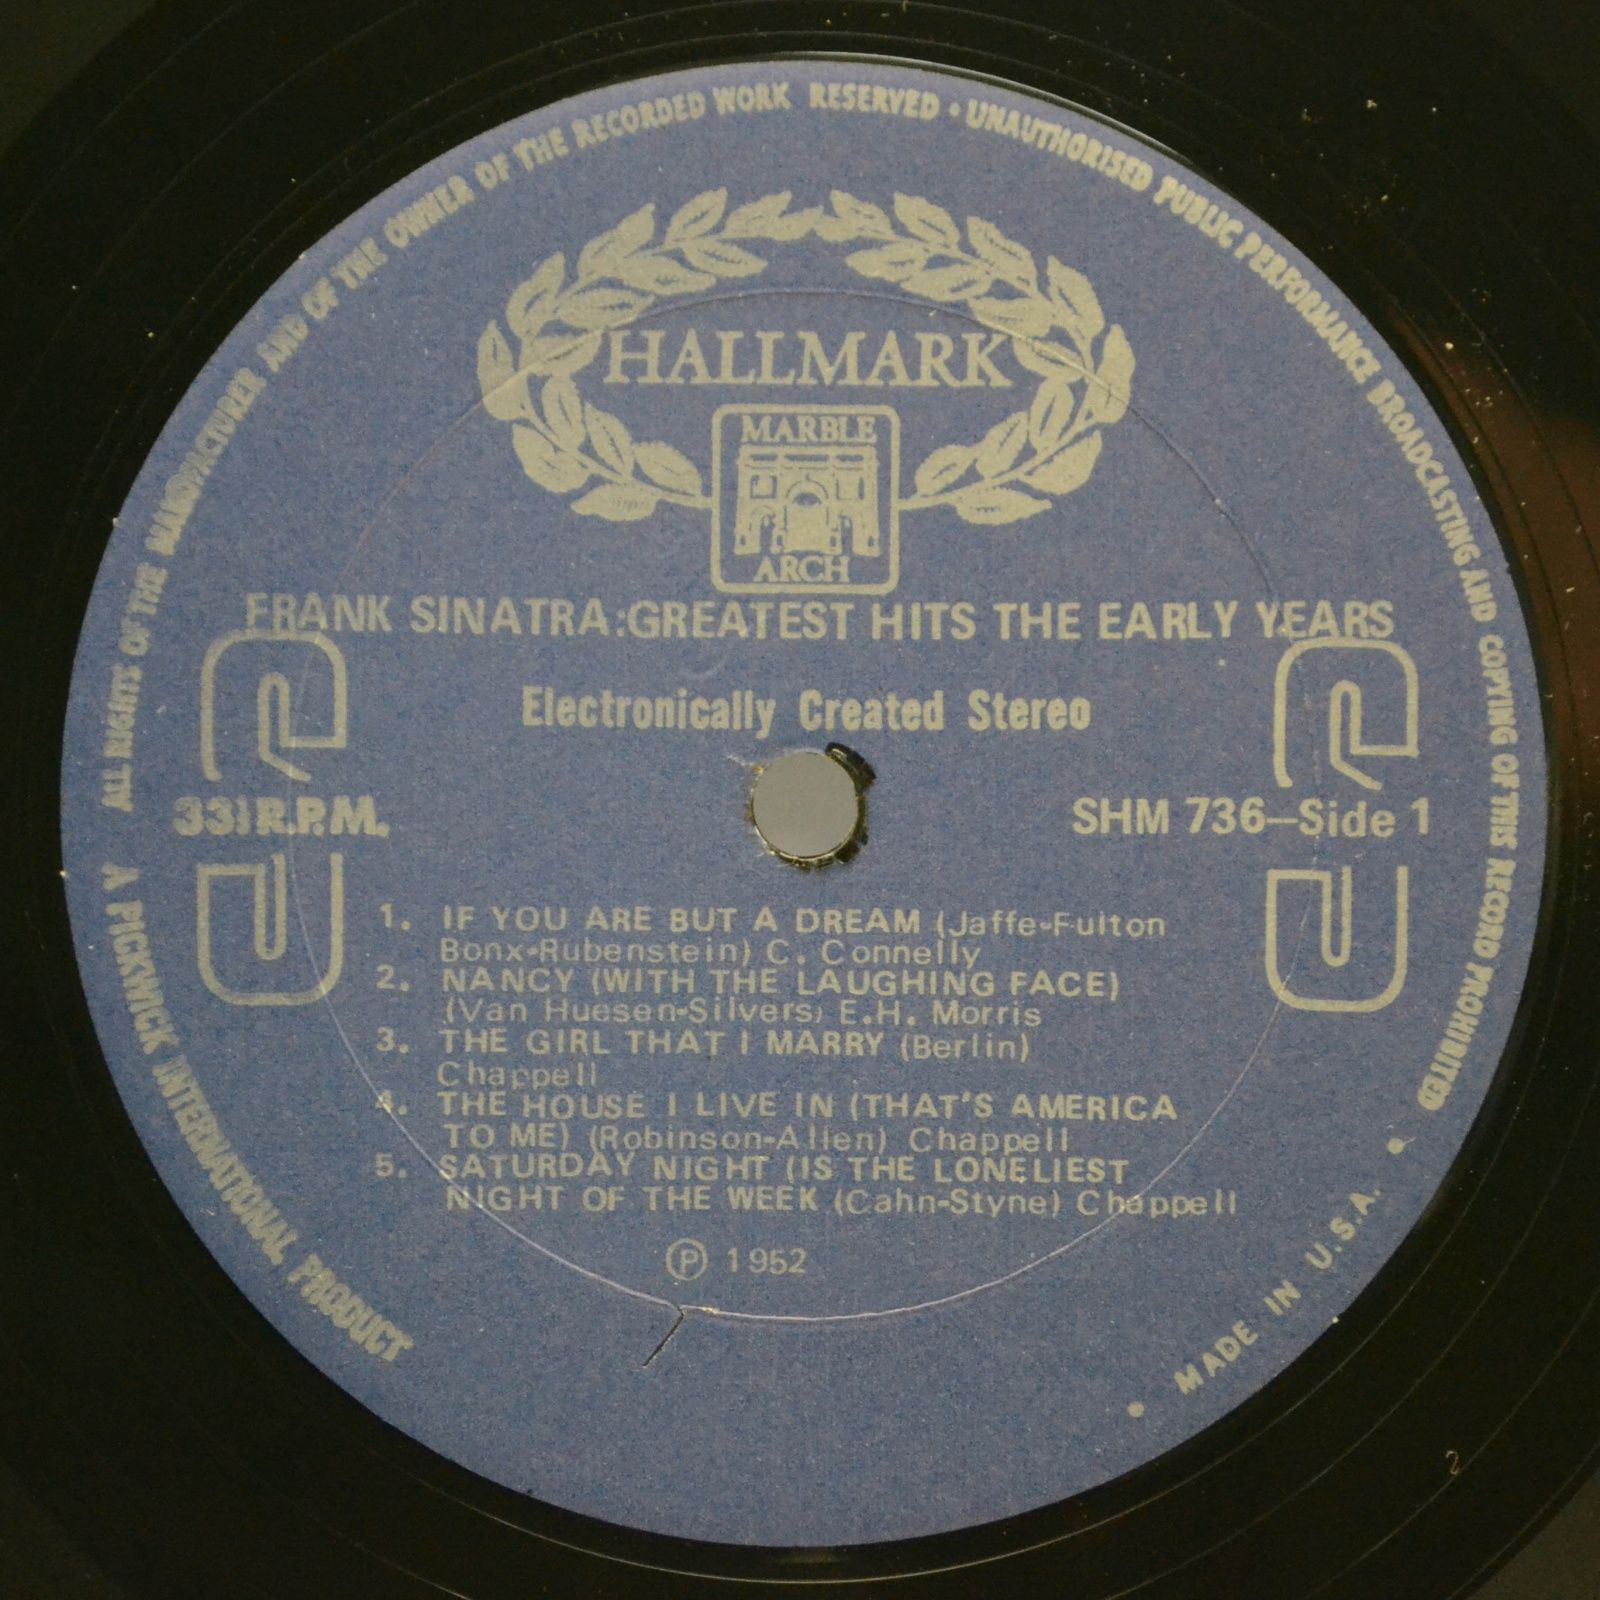 Frank Sinatra — Greatest Hits - The Early Years (USA), 1952